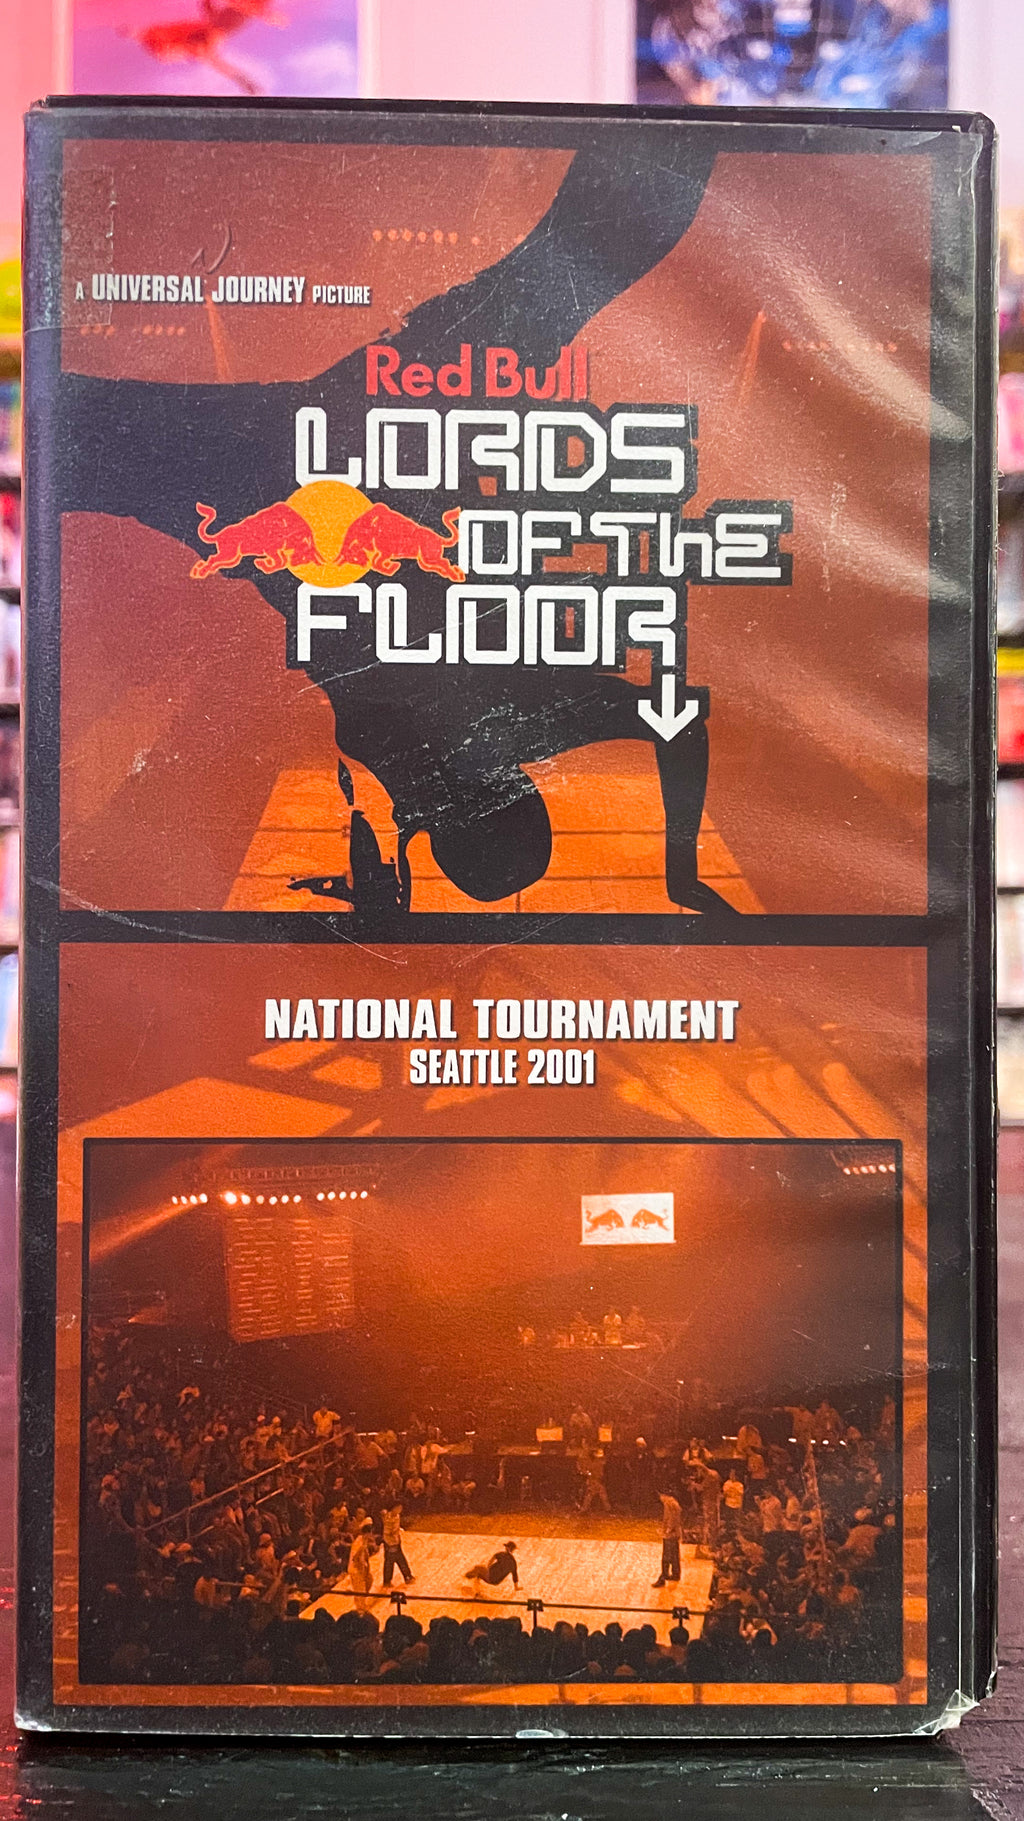 Red Bull Lords of the Floor - National Tournament Seattle 2001